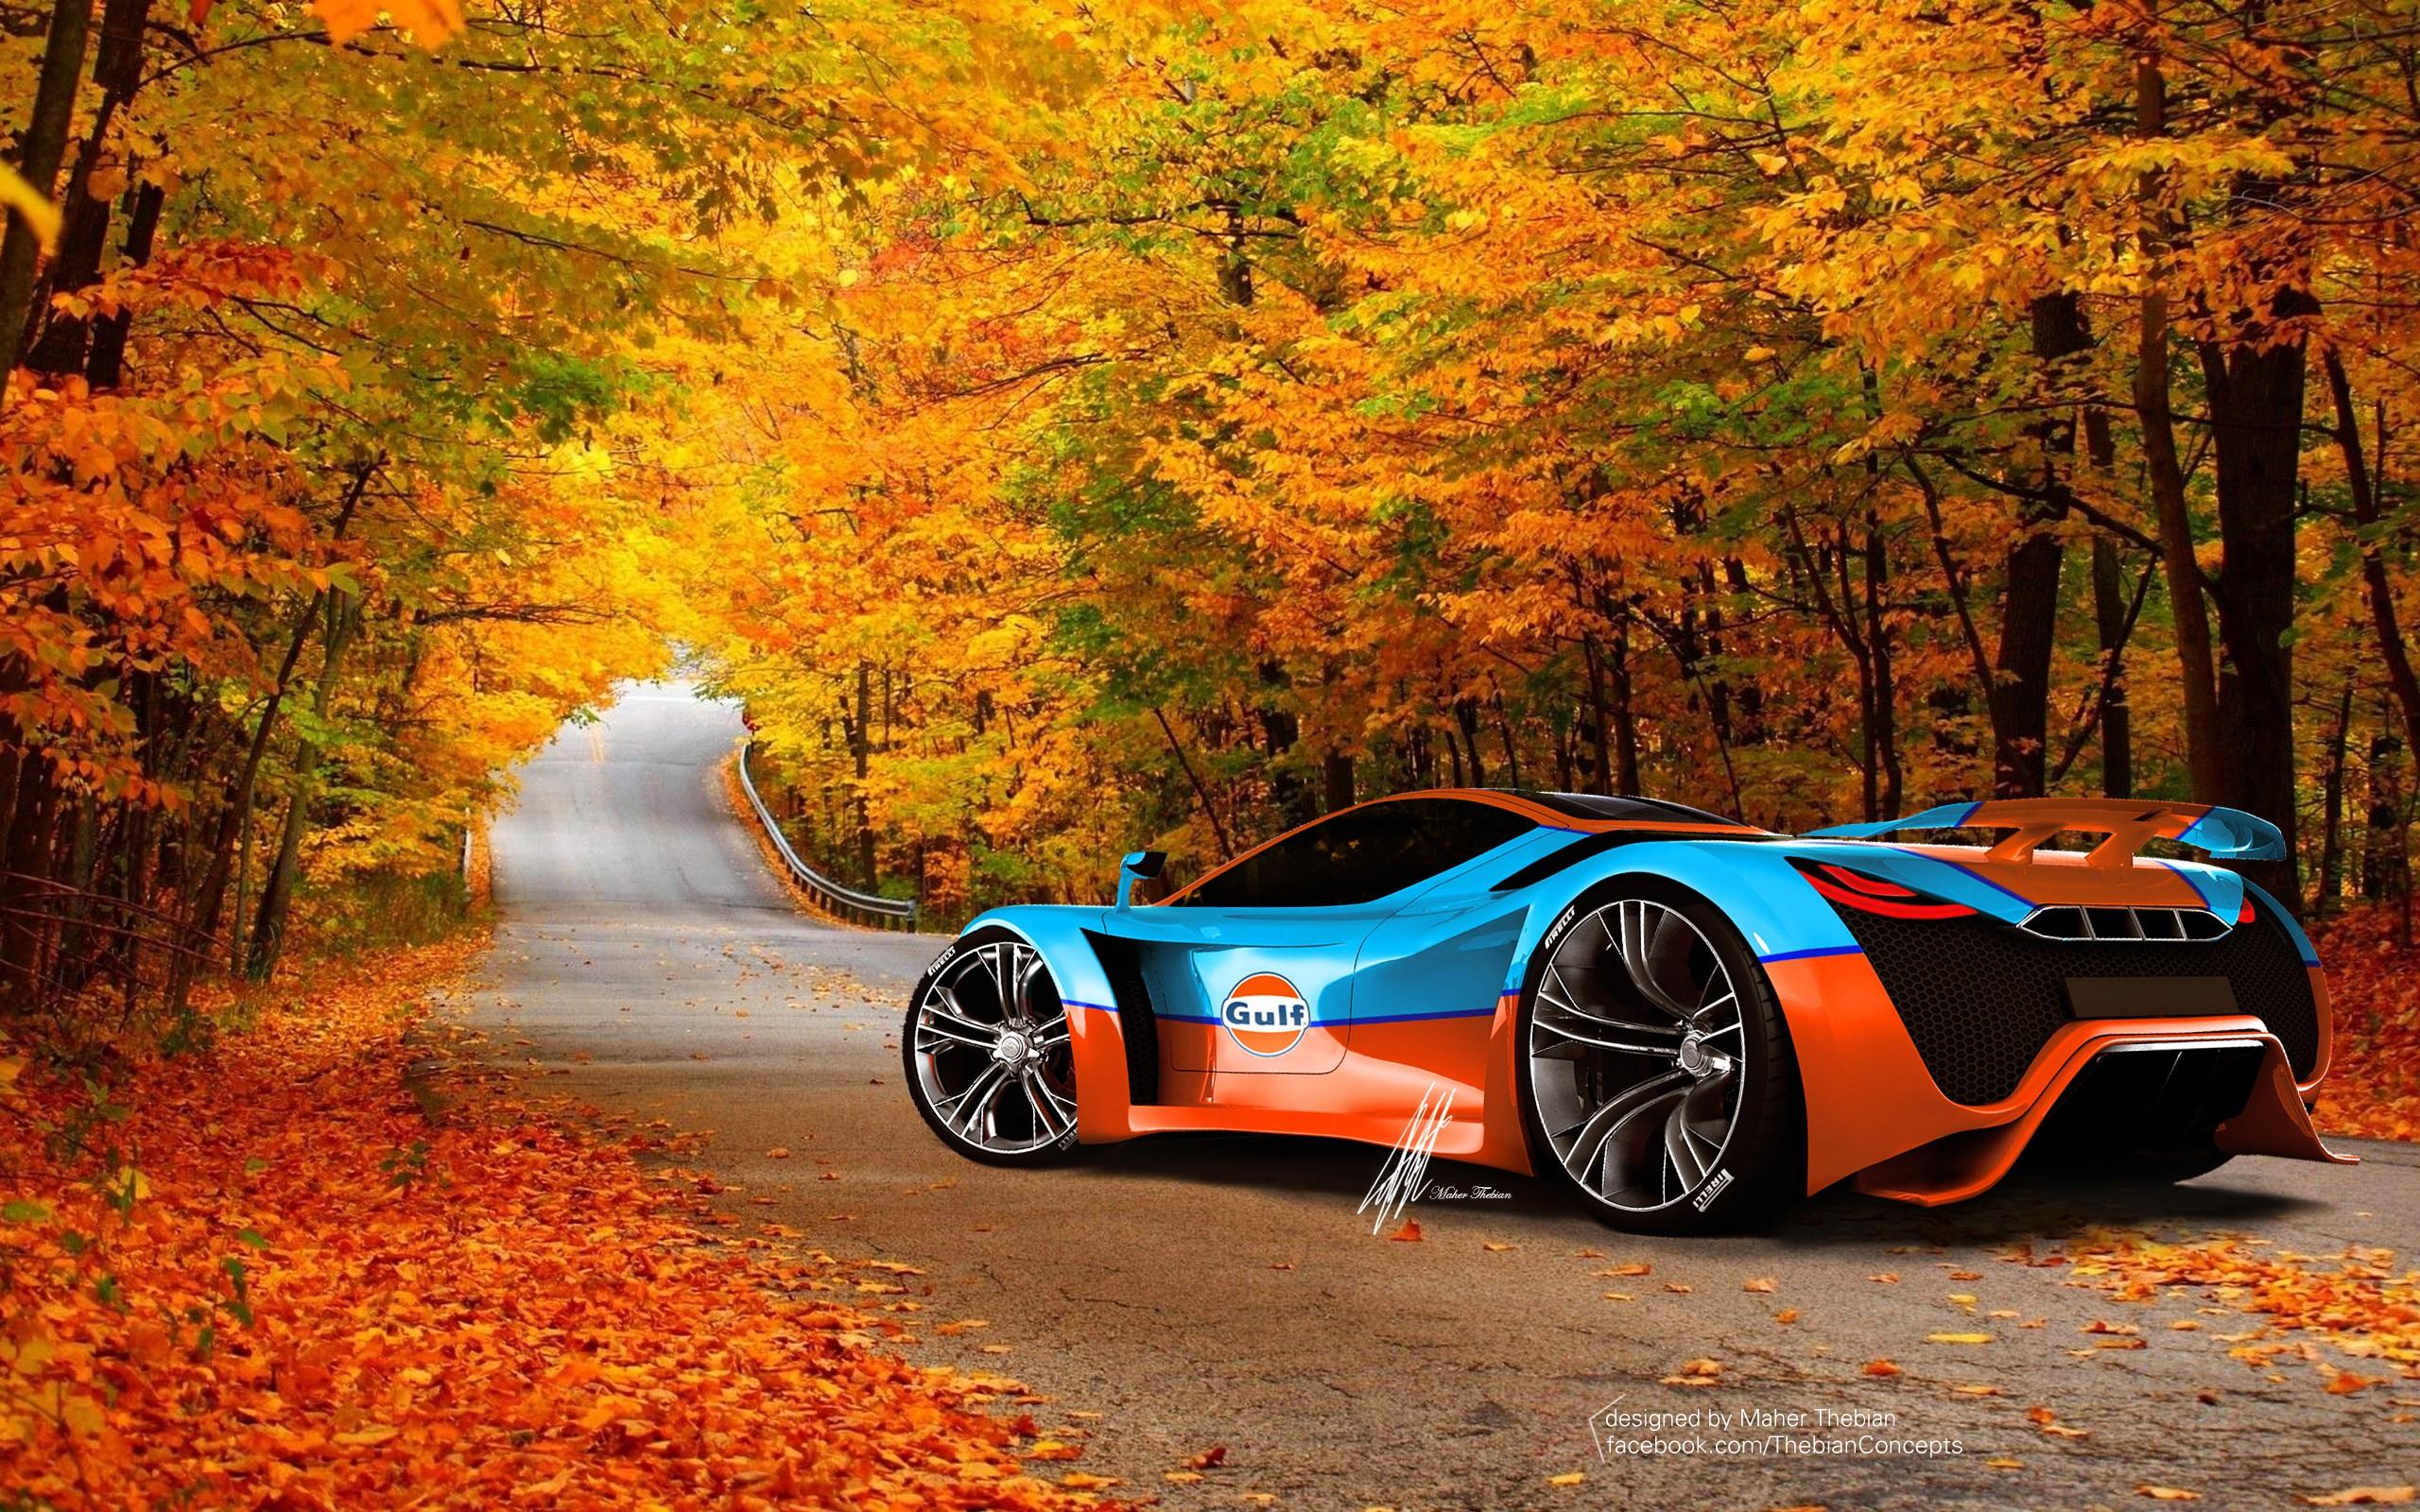 Wallpapers - Car Image Hd Download , HD Wallpaper & Backgrounds